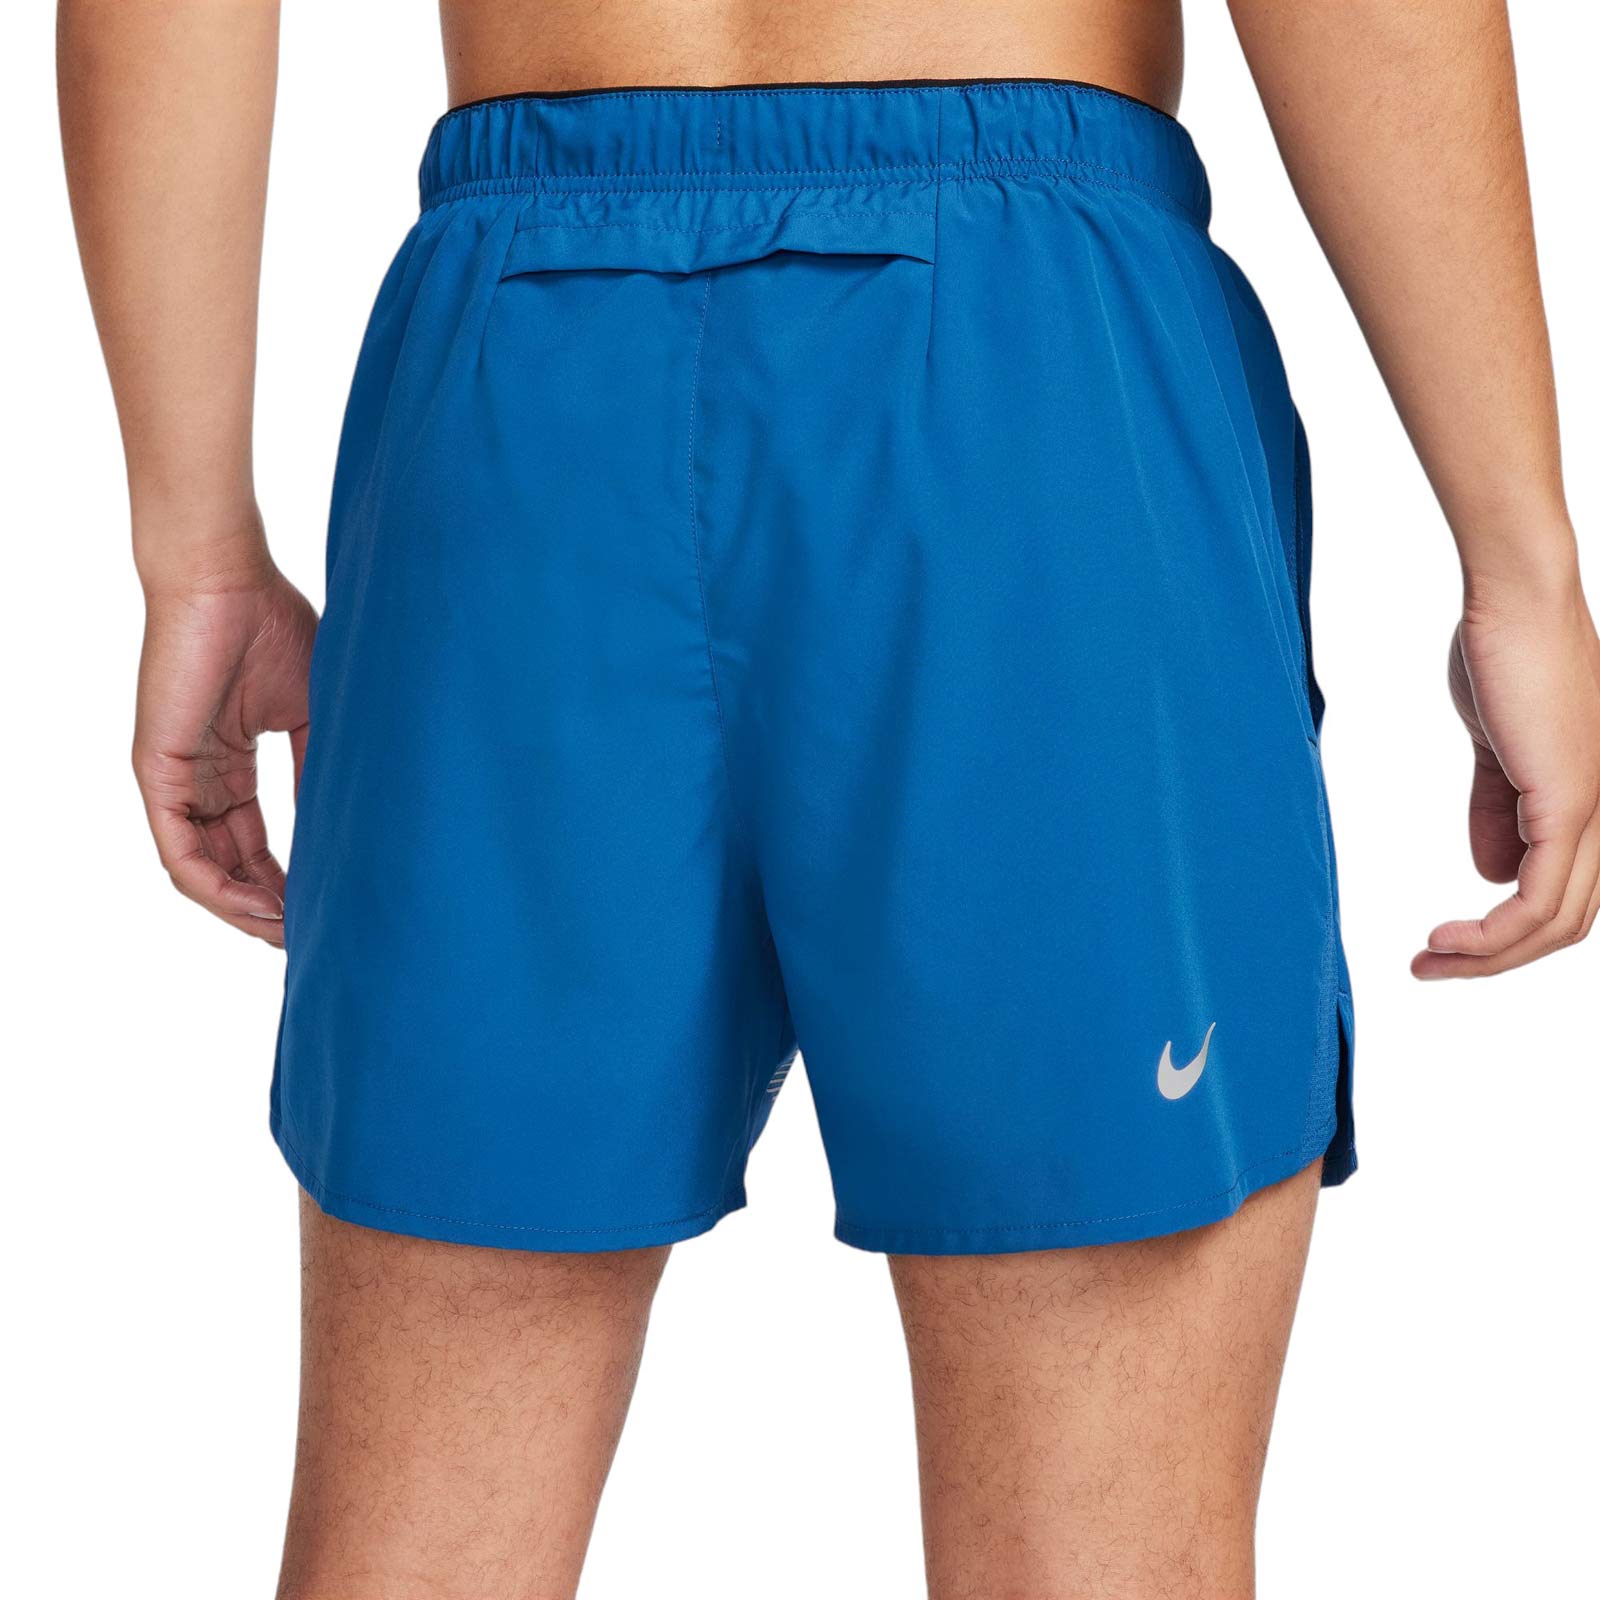 NIKE CHALLENGER FLASH MENS DRI-FIT 5" BRIEF-LINED RUNNING SHORTS